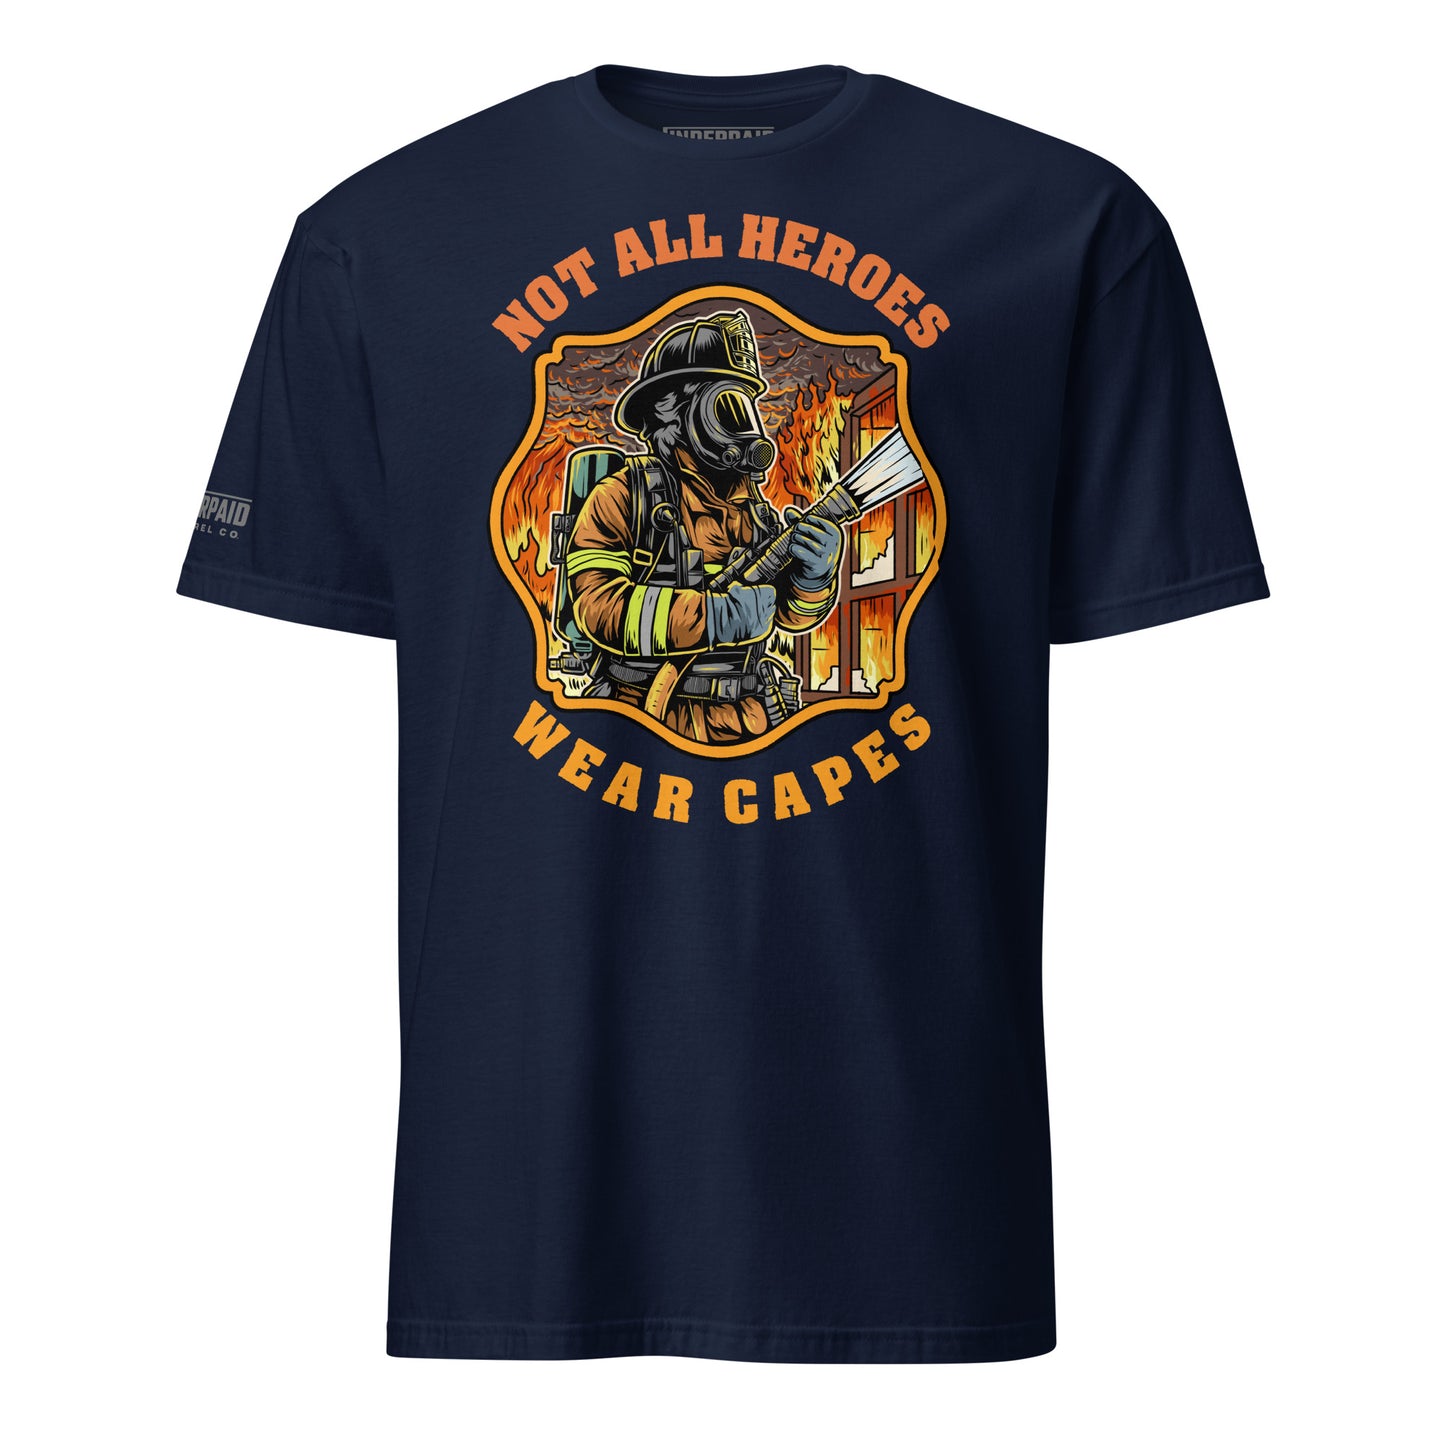 Fireman tee featuring graphic design in full color